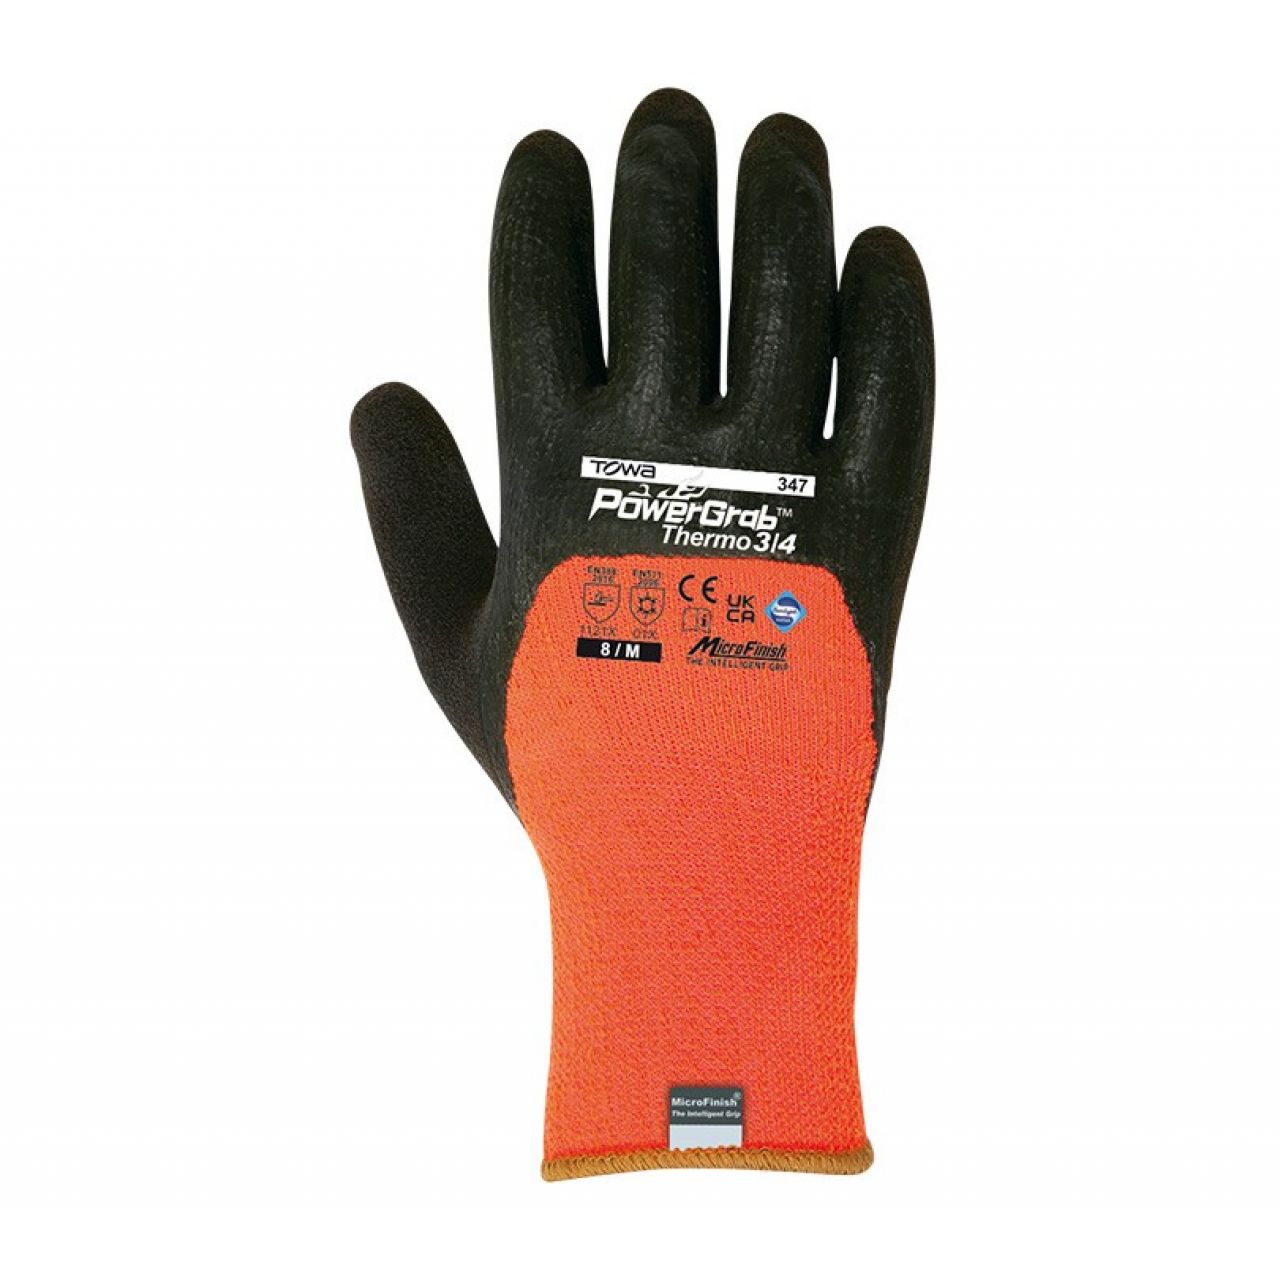 Guante Towa - 347 POWER GRAB THERMO 3/4